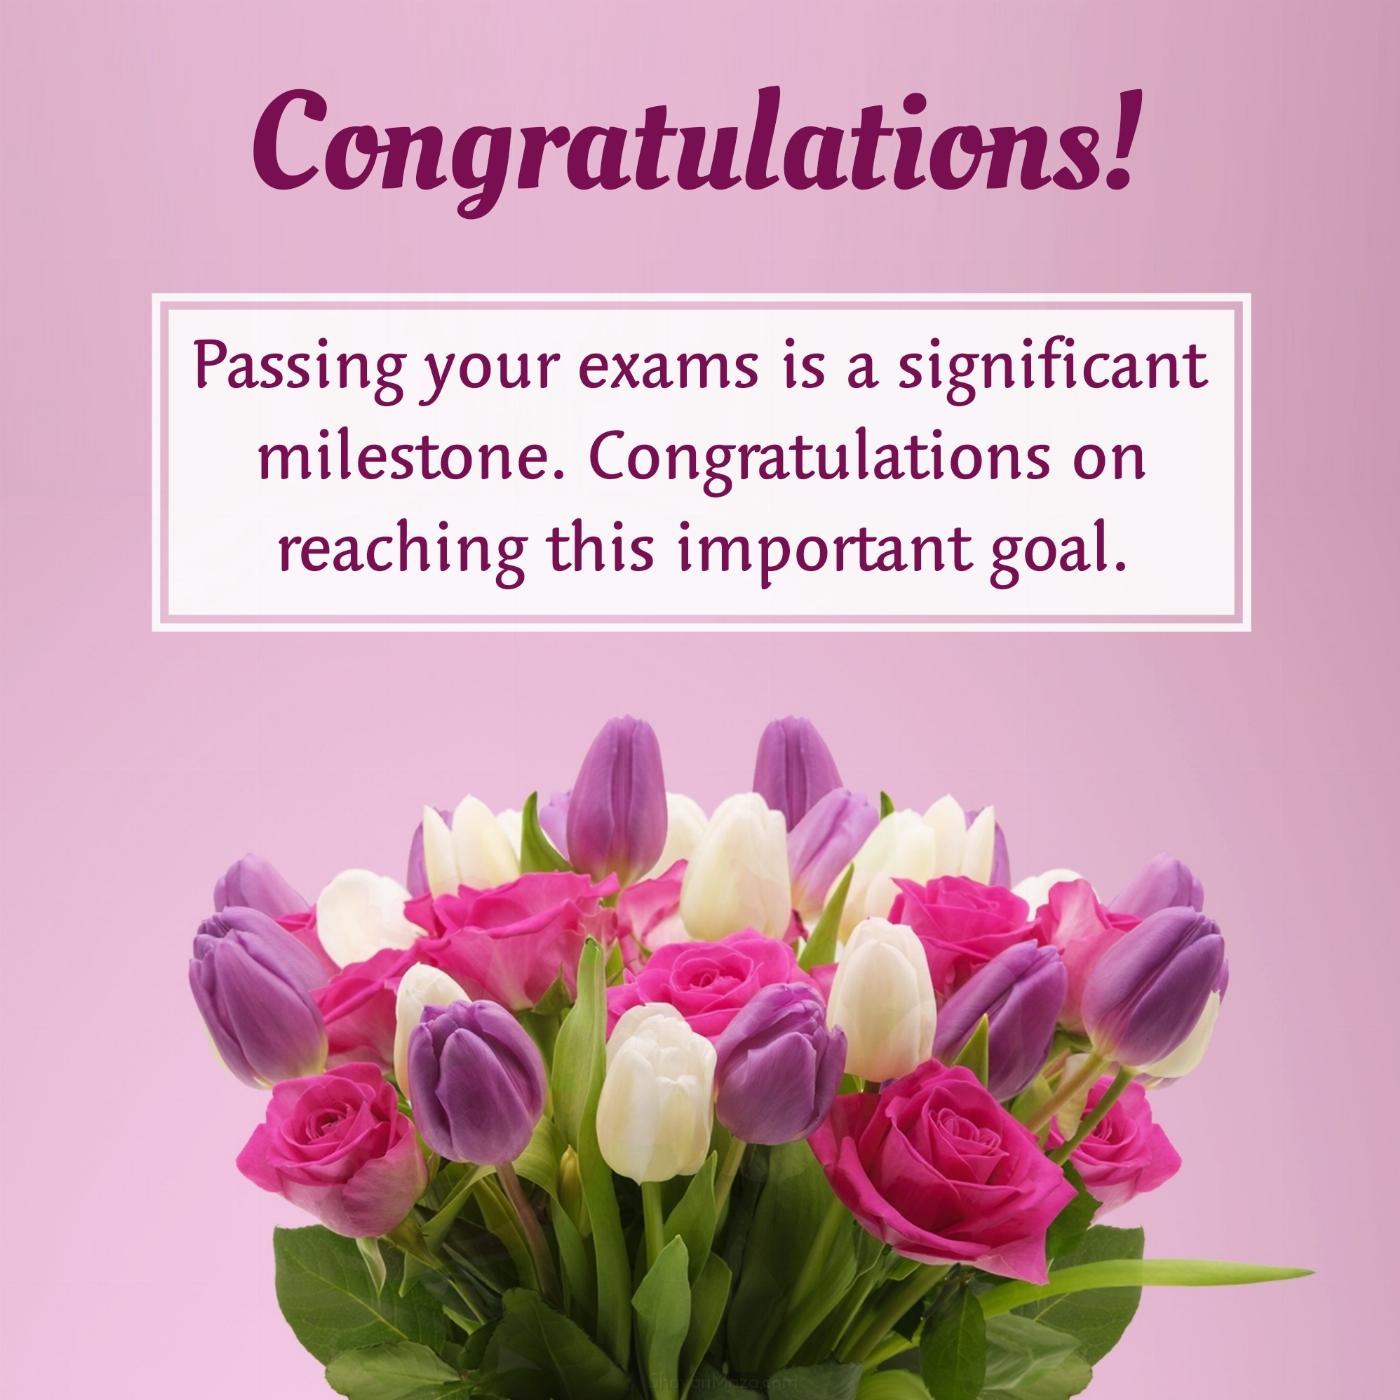 Passing your exams is a significant milestone